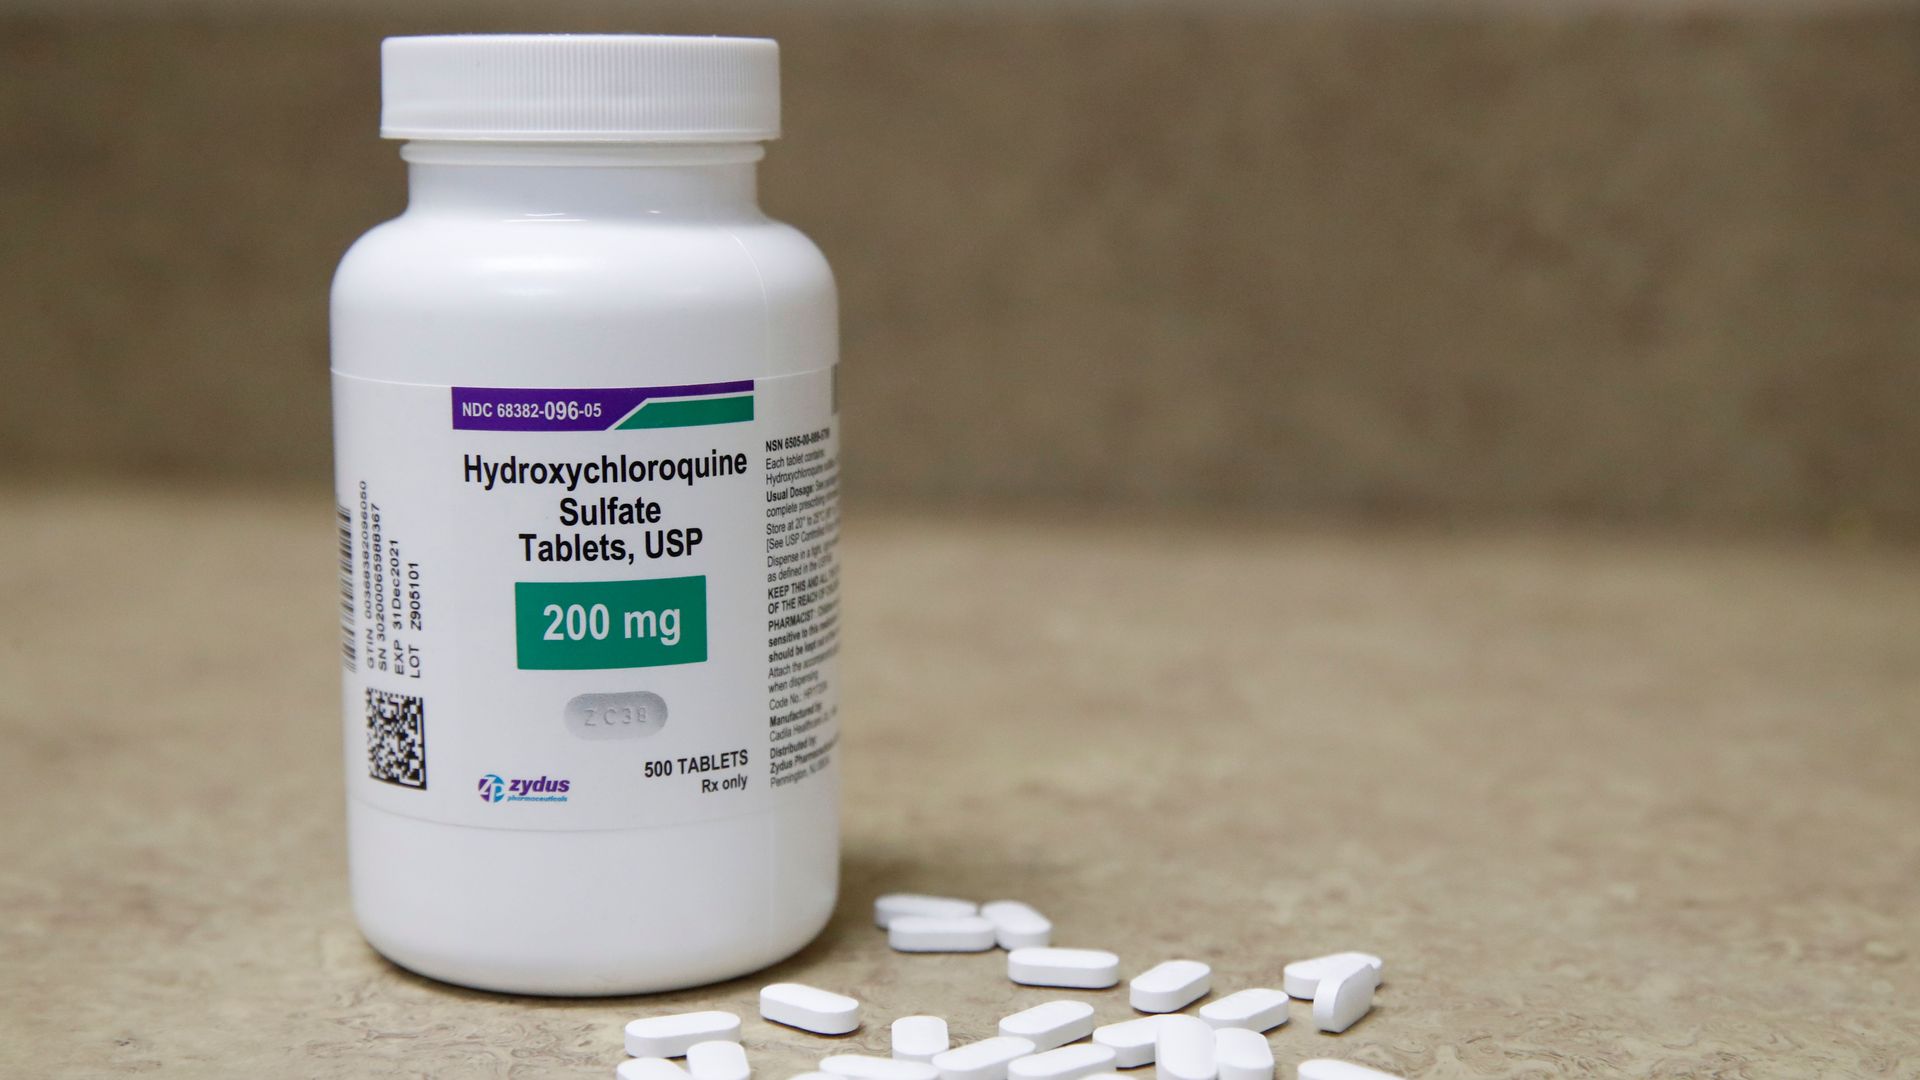 A white bottle of hydroxychloroquine and white pills on a table.